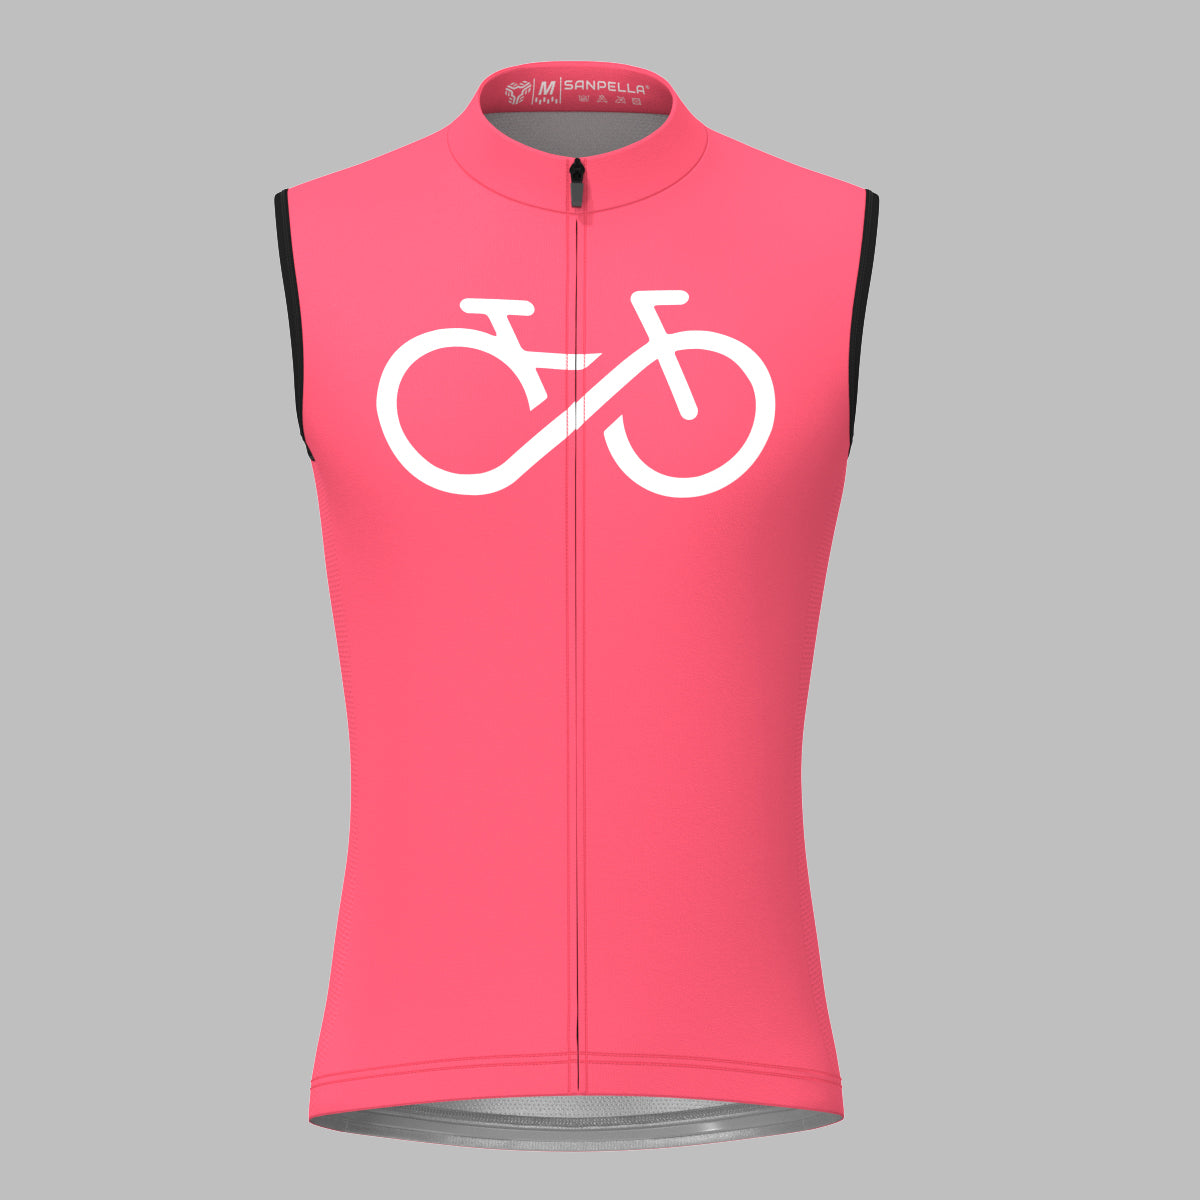 Men's Bike Forever Sleeveless Cycling Jersey - Pink